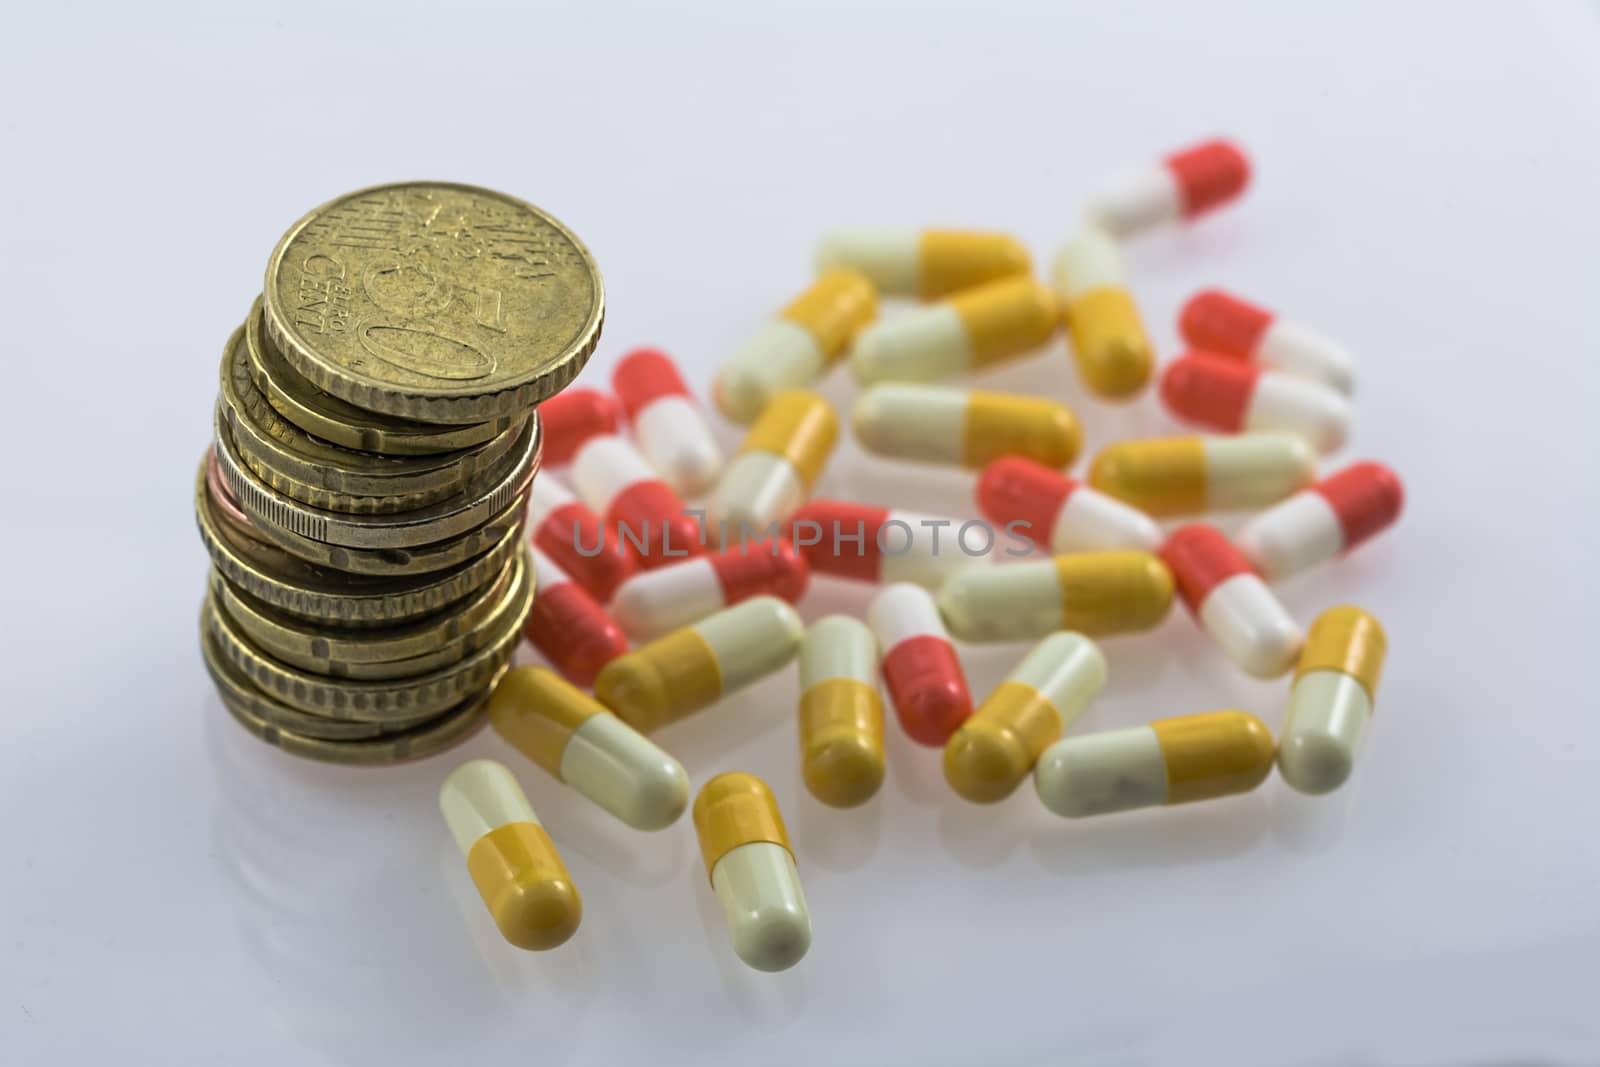 Concept of sanitary copayment, money and medicines